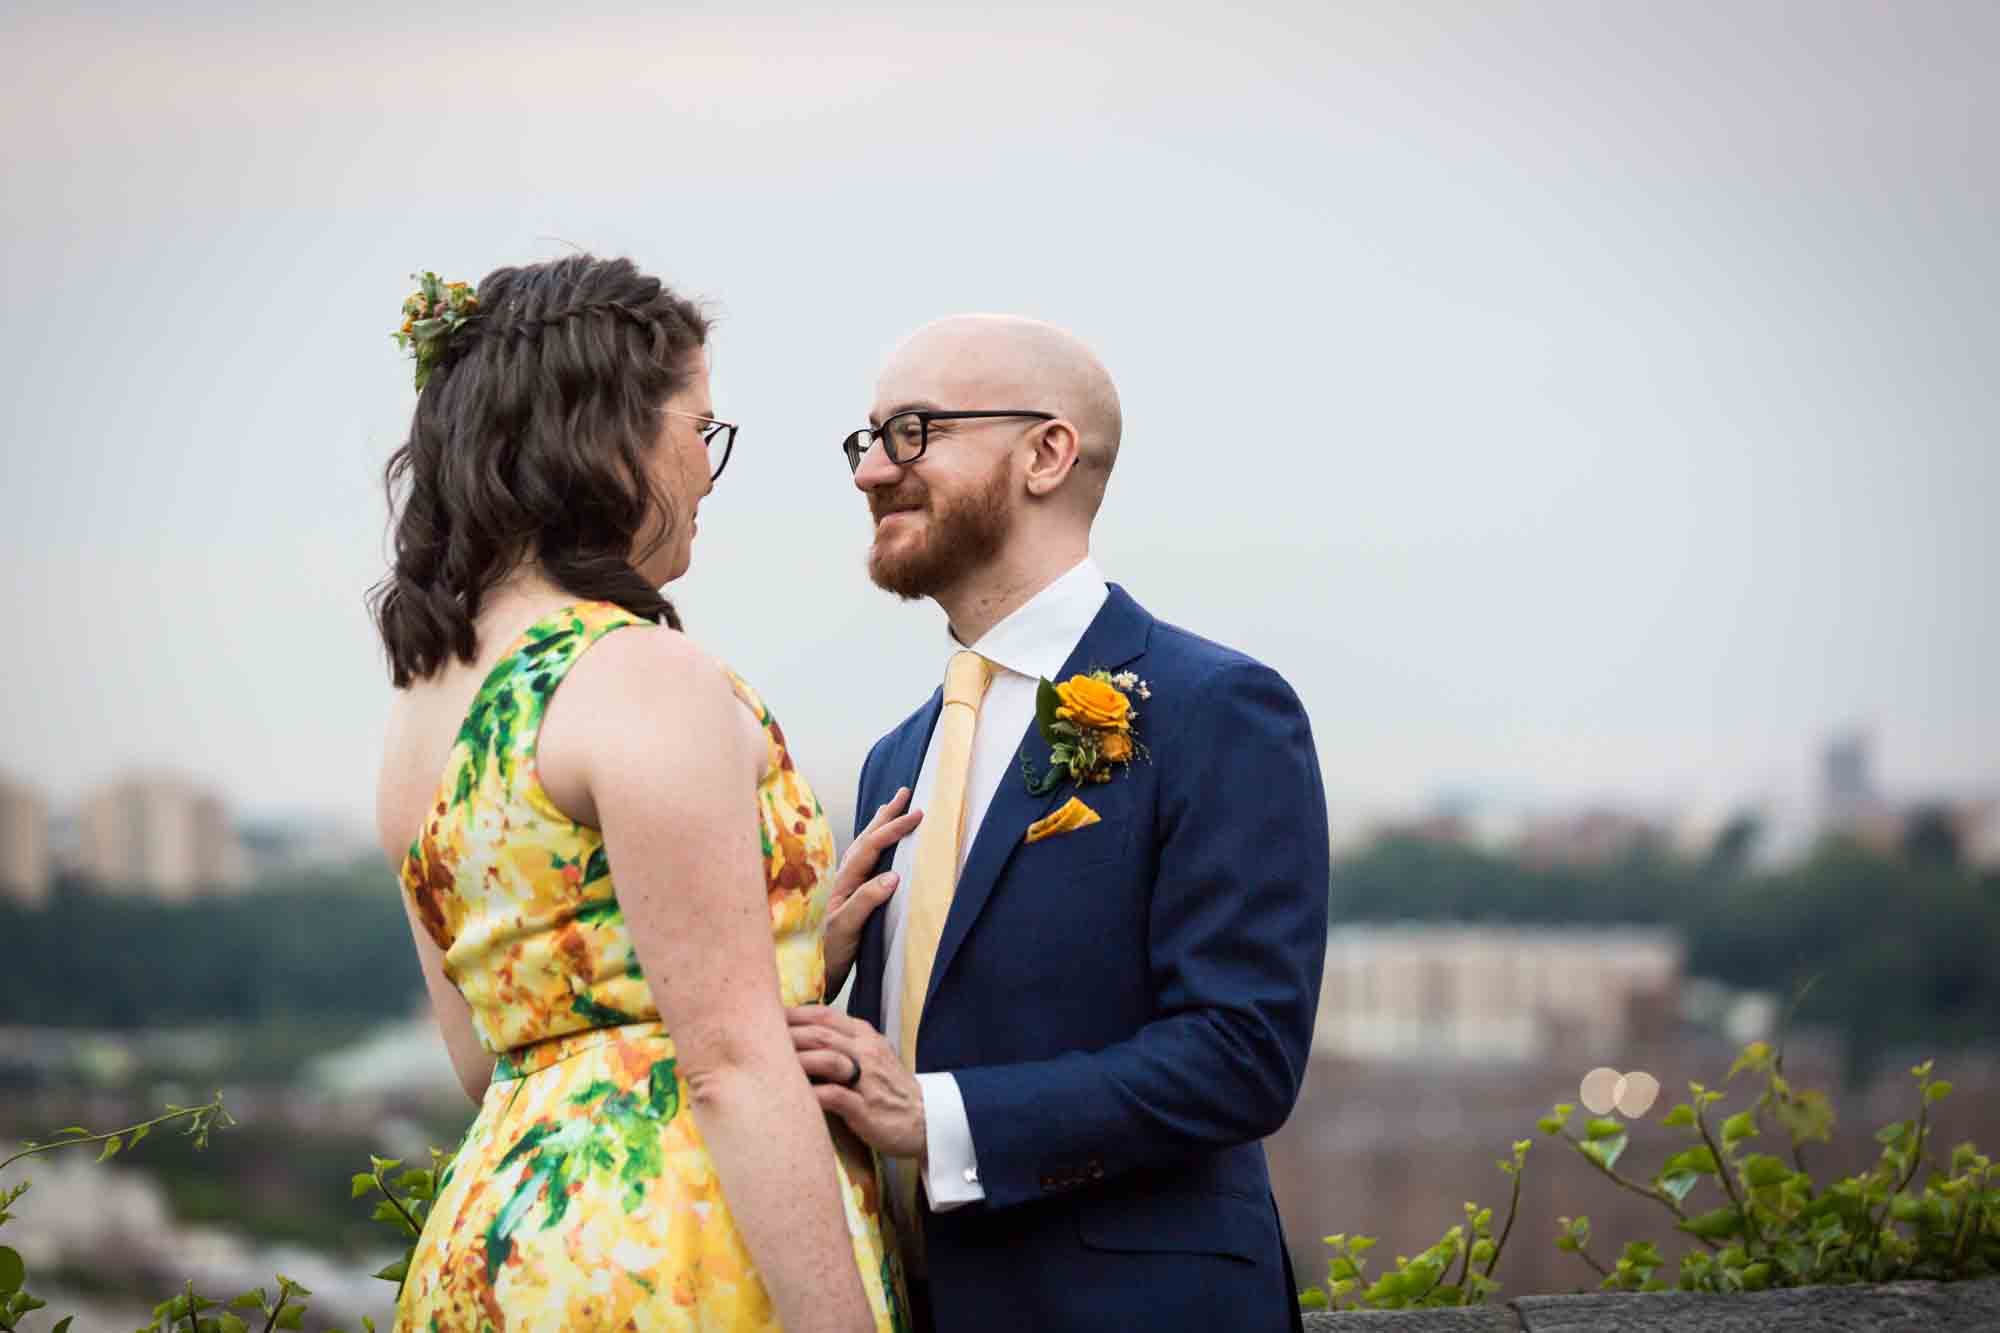 Fort Tryon wedding photos of groom looking at bride wearing yellow dress